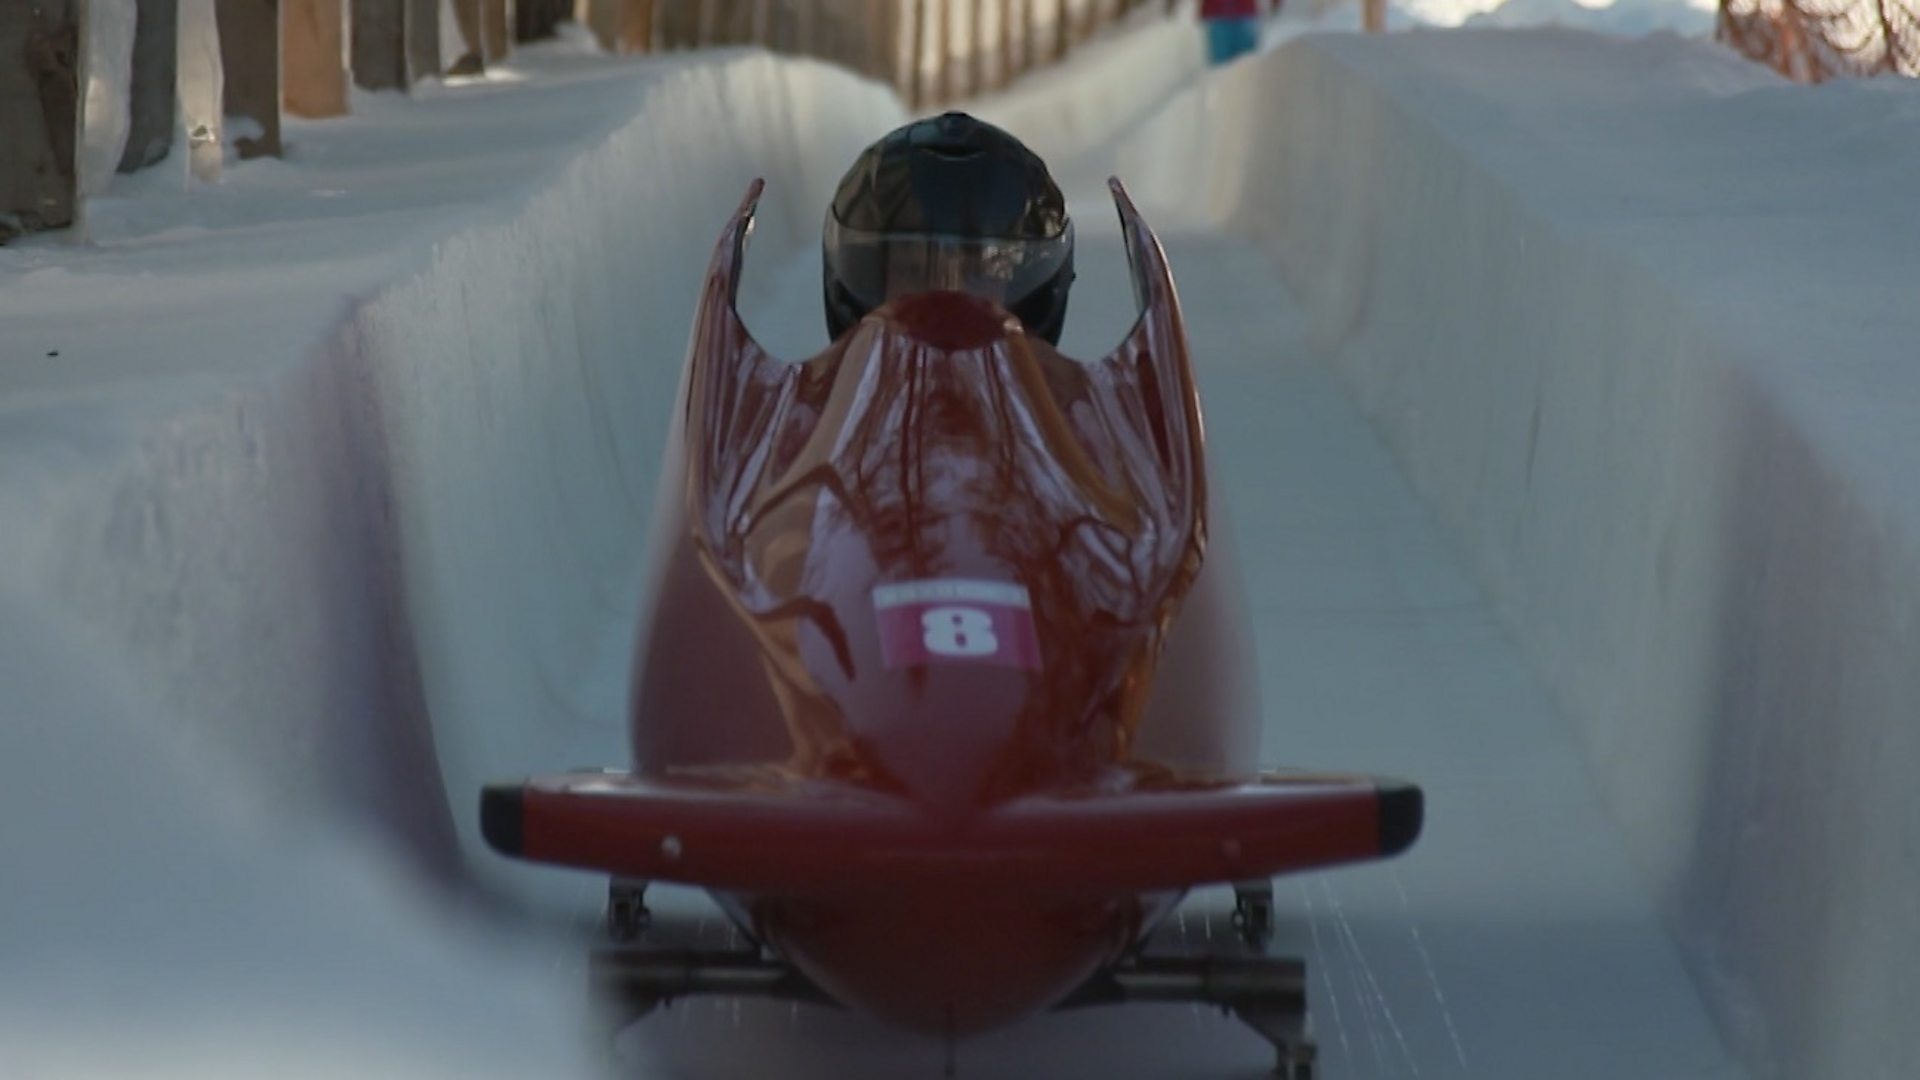 Bobsleigh: A one-man bobsled, An aerodynamic composite-bodied vehicle for one person instead of a team. 1920x1080 Full HD Background.